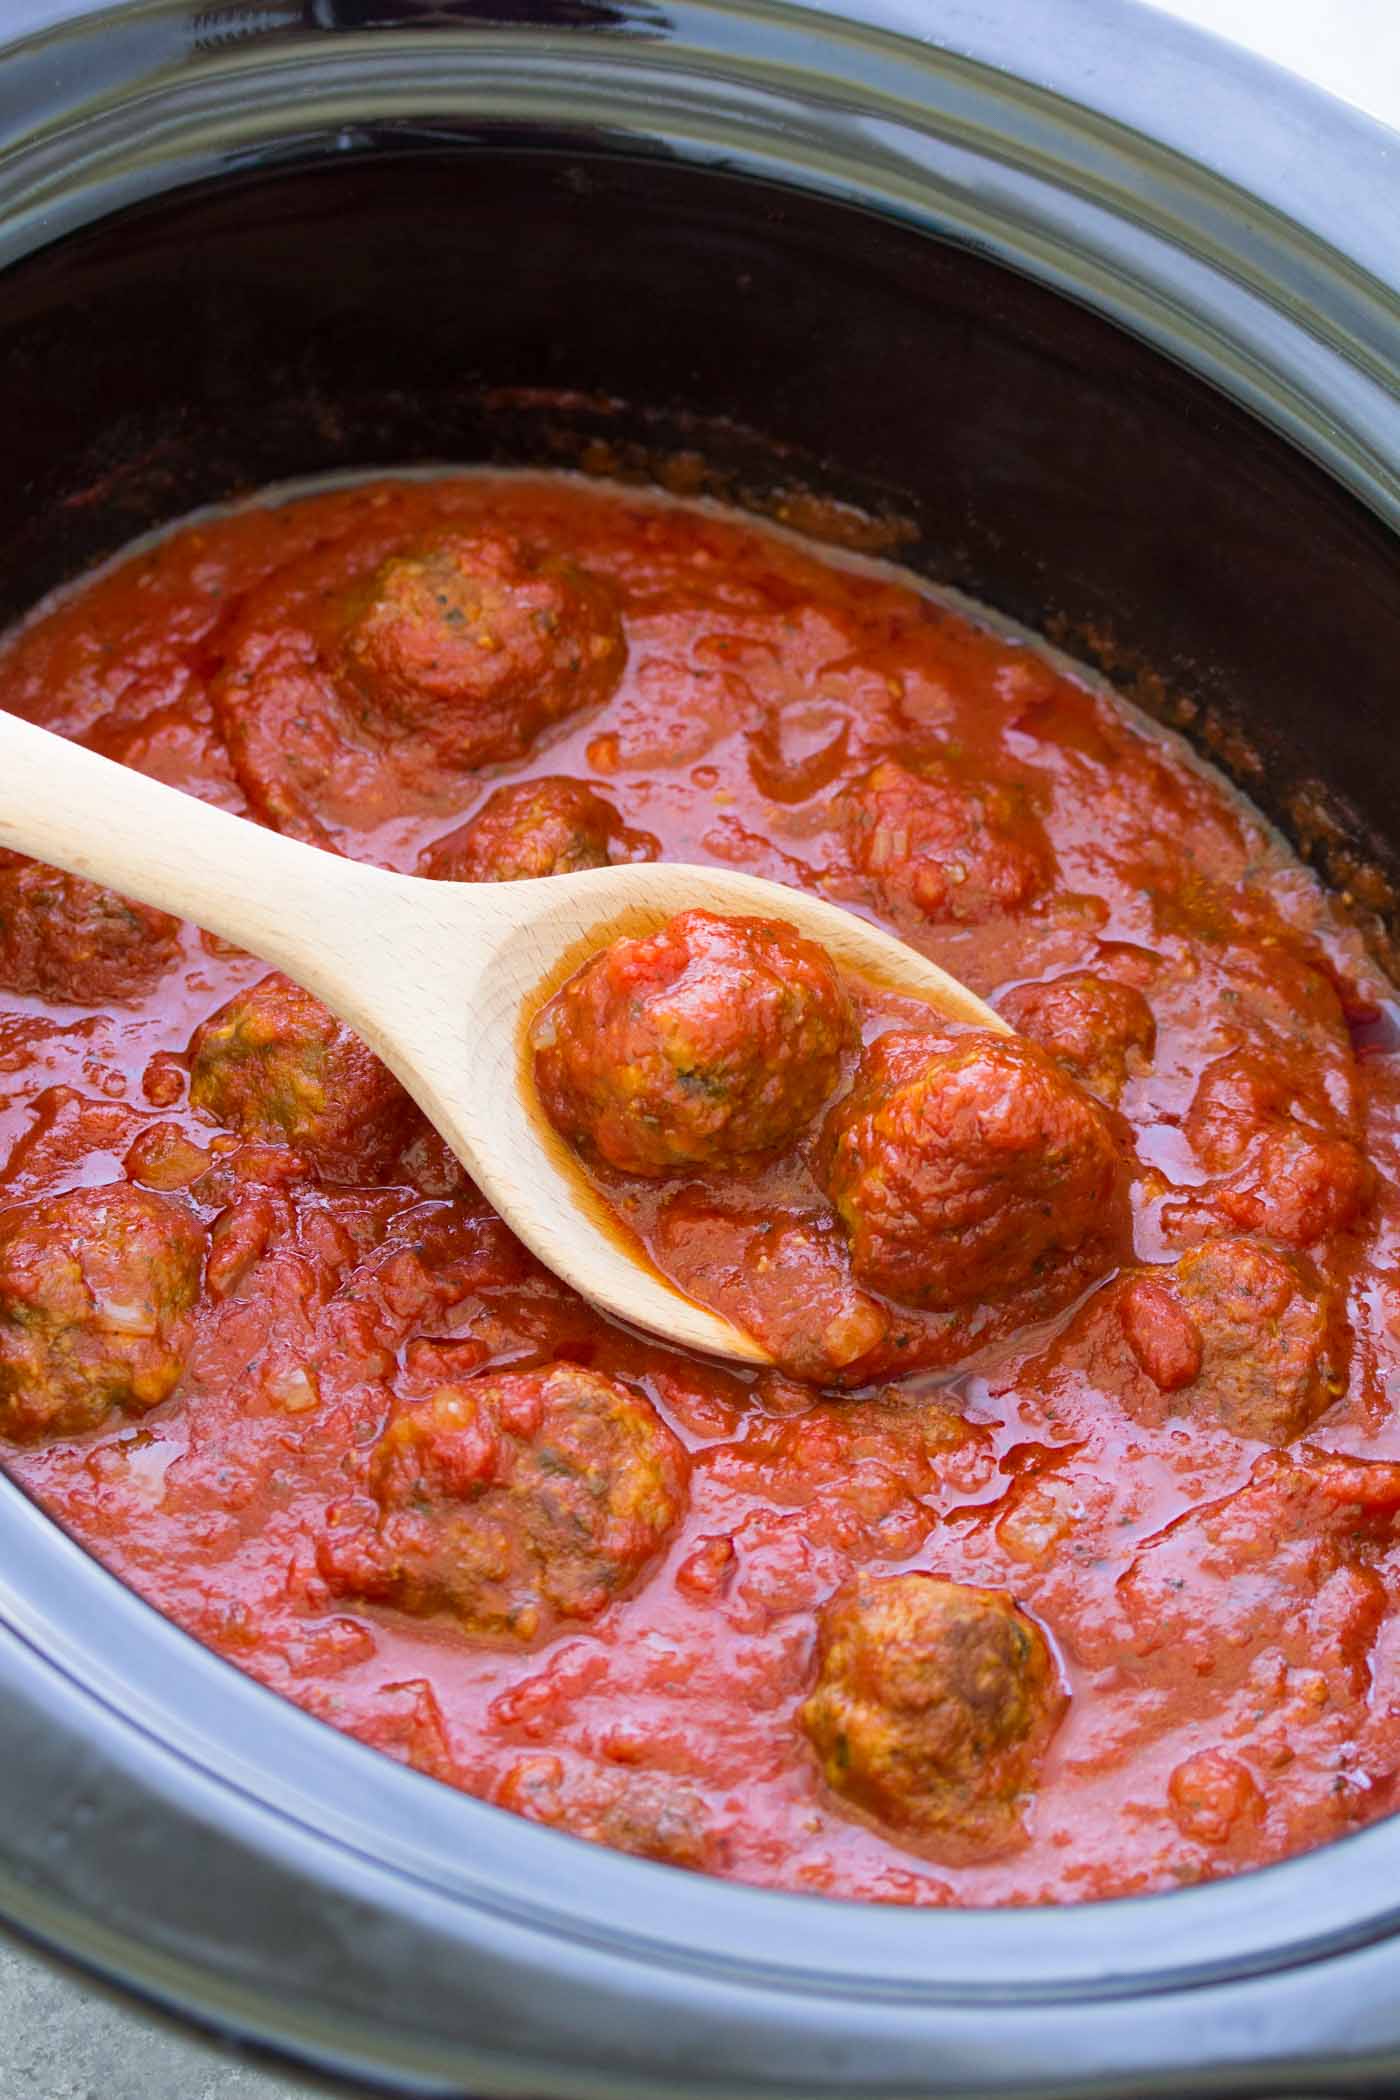 Italian meatballs and marinara sauce in slow cooker with wooden spoon.